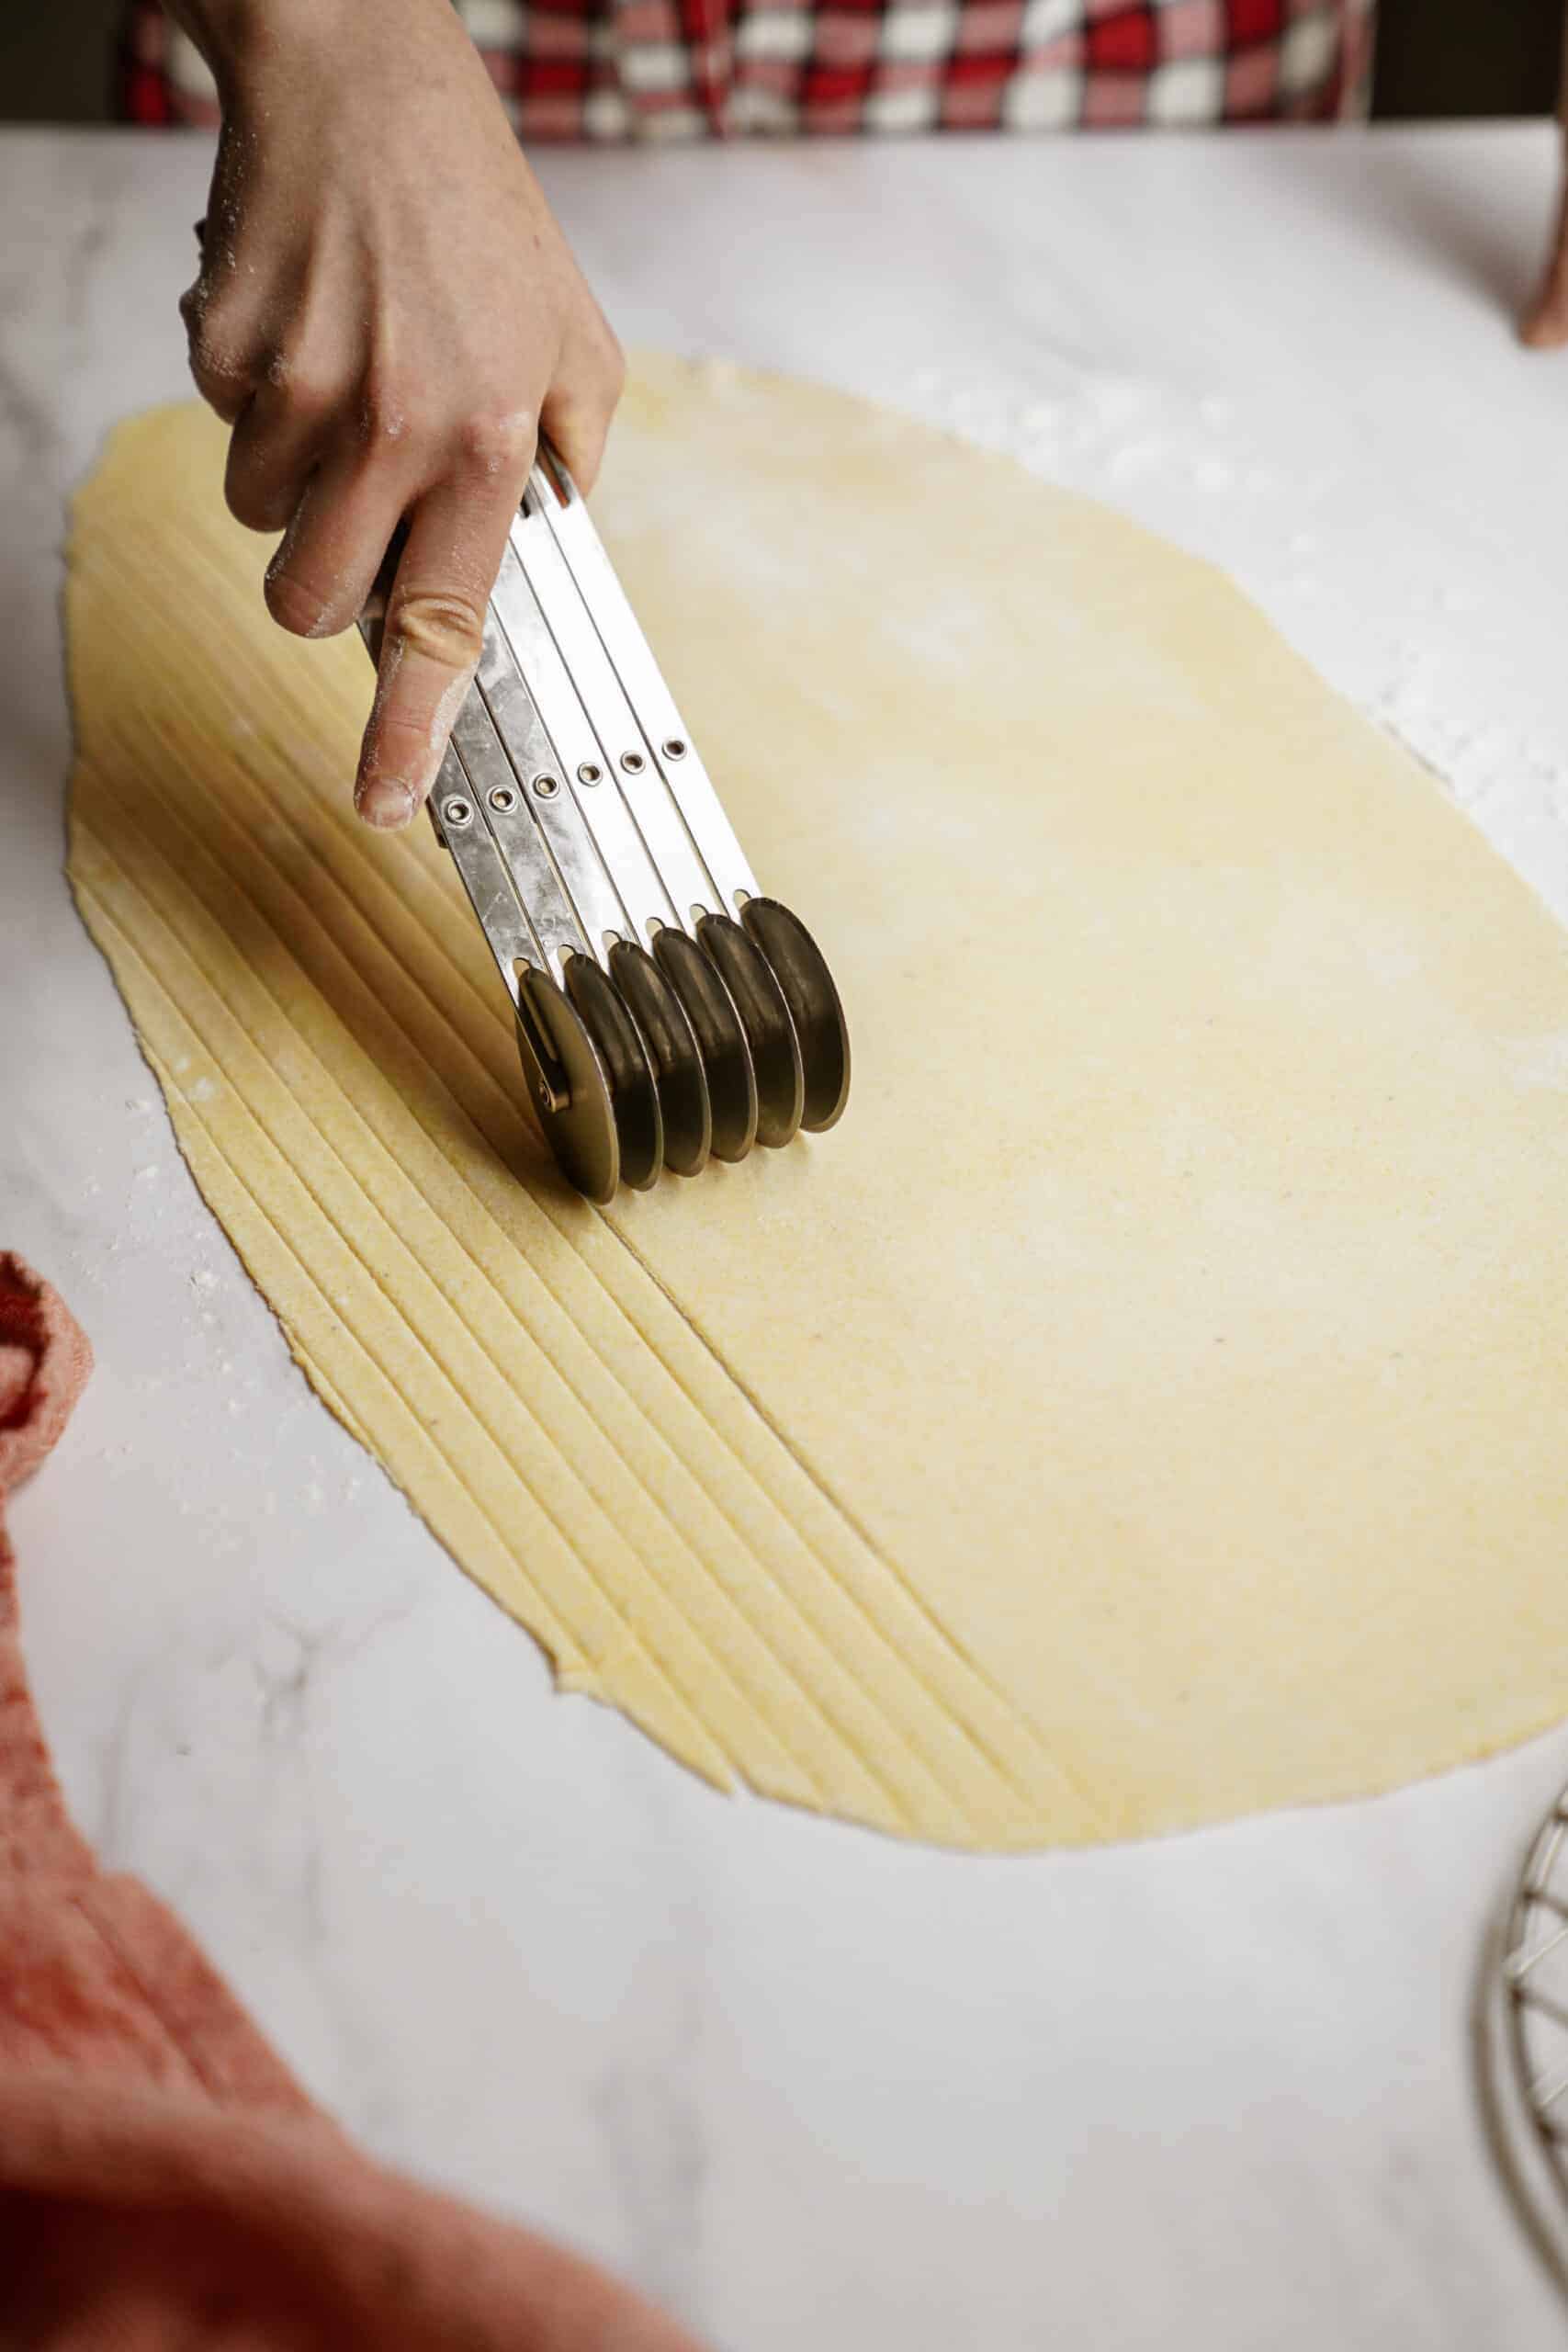 Pasta noodles being cut out of dough